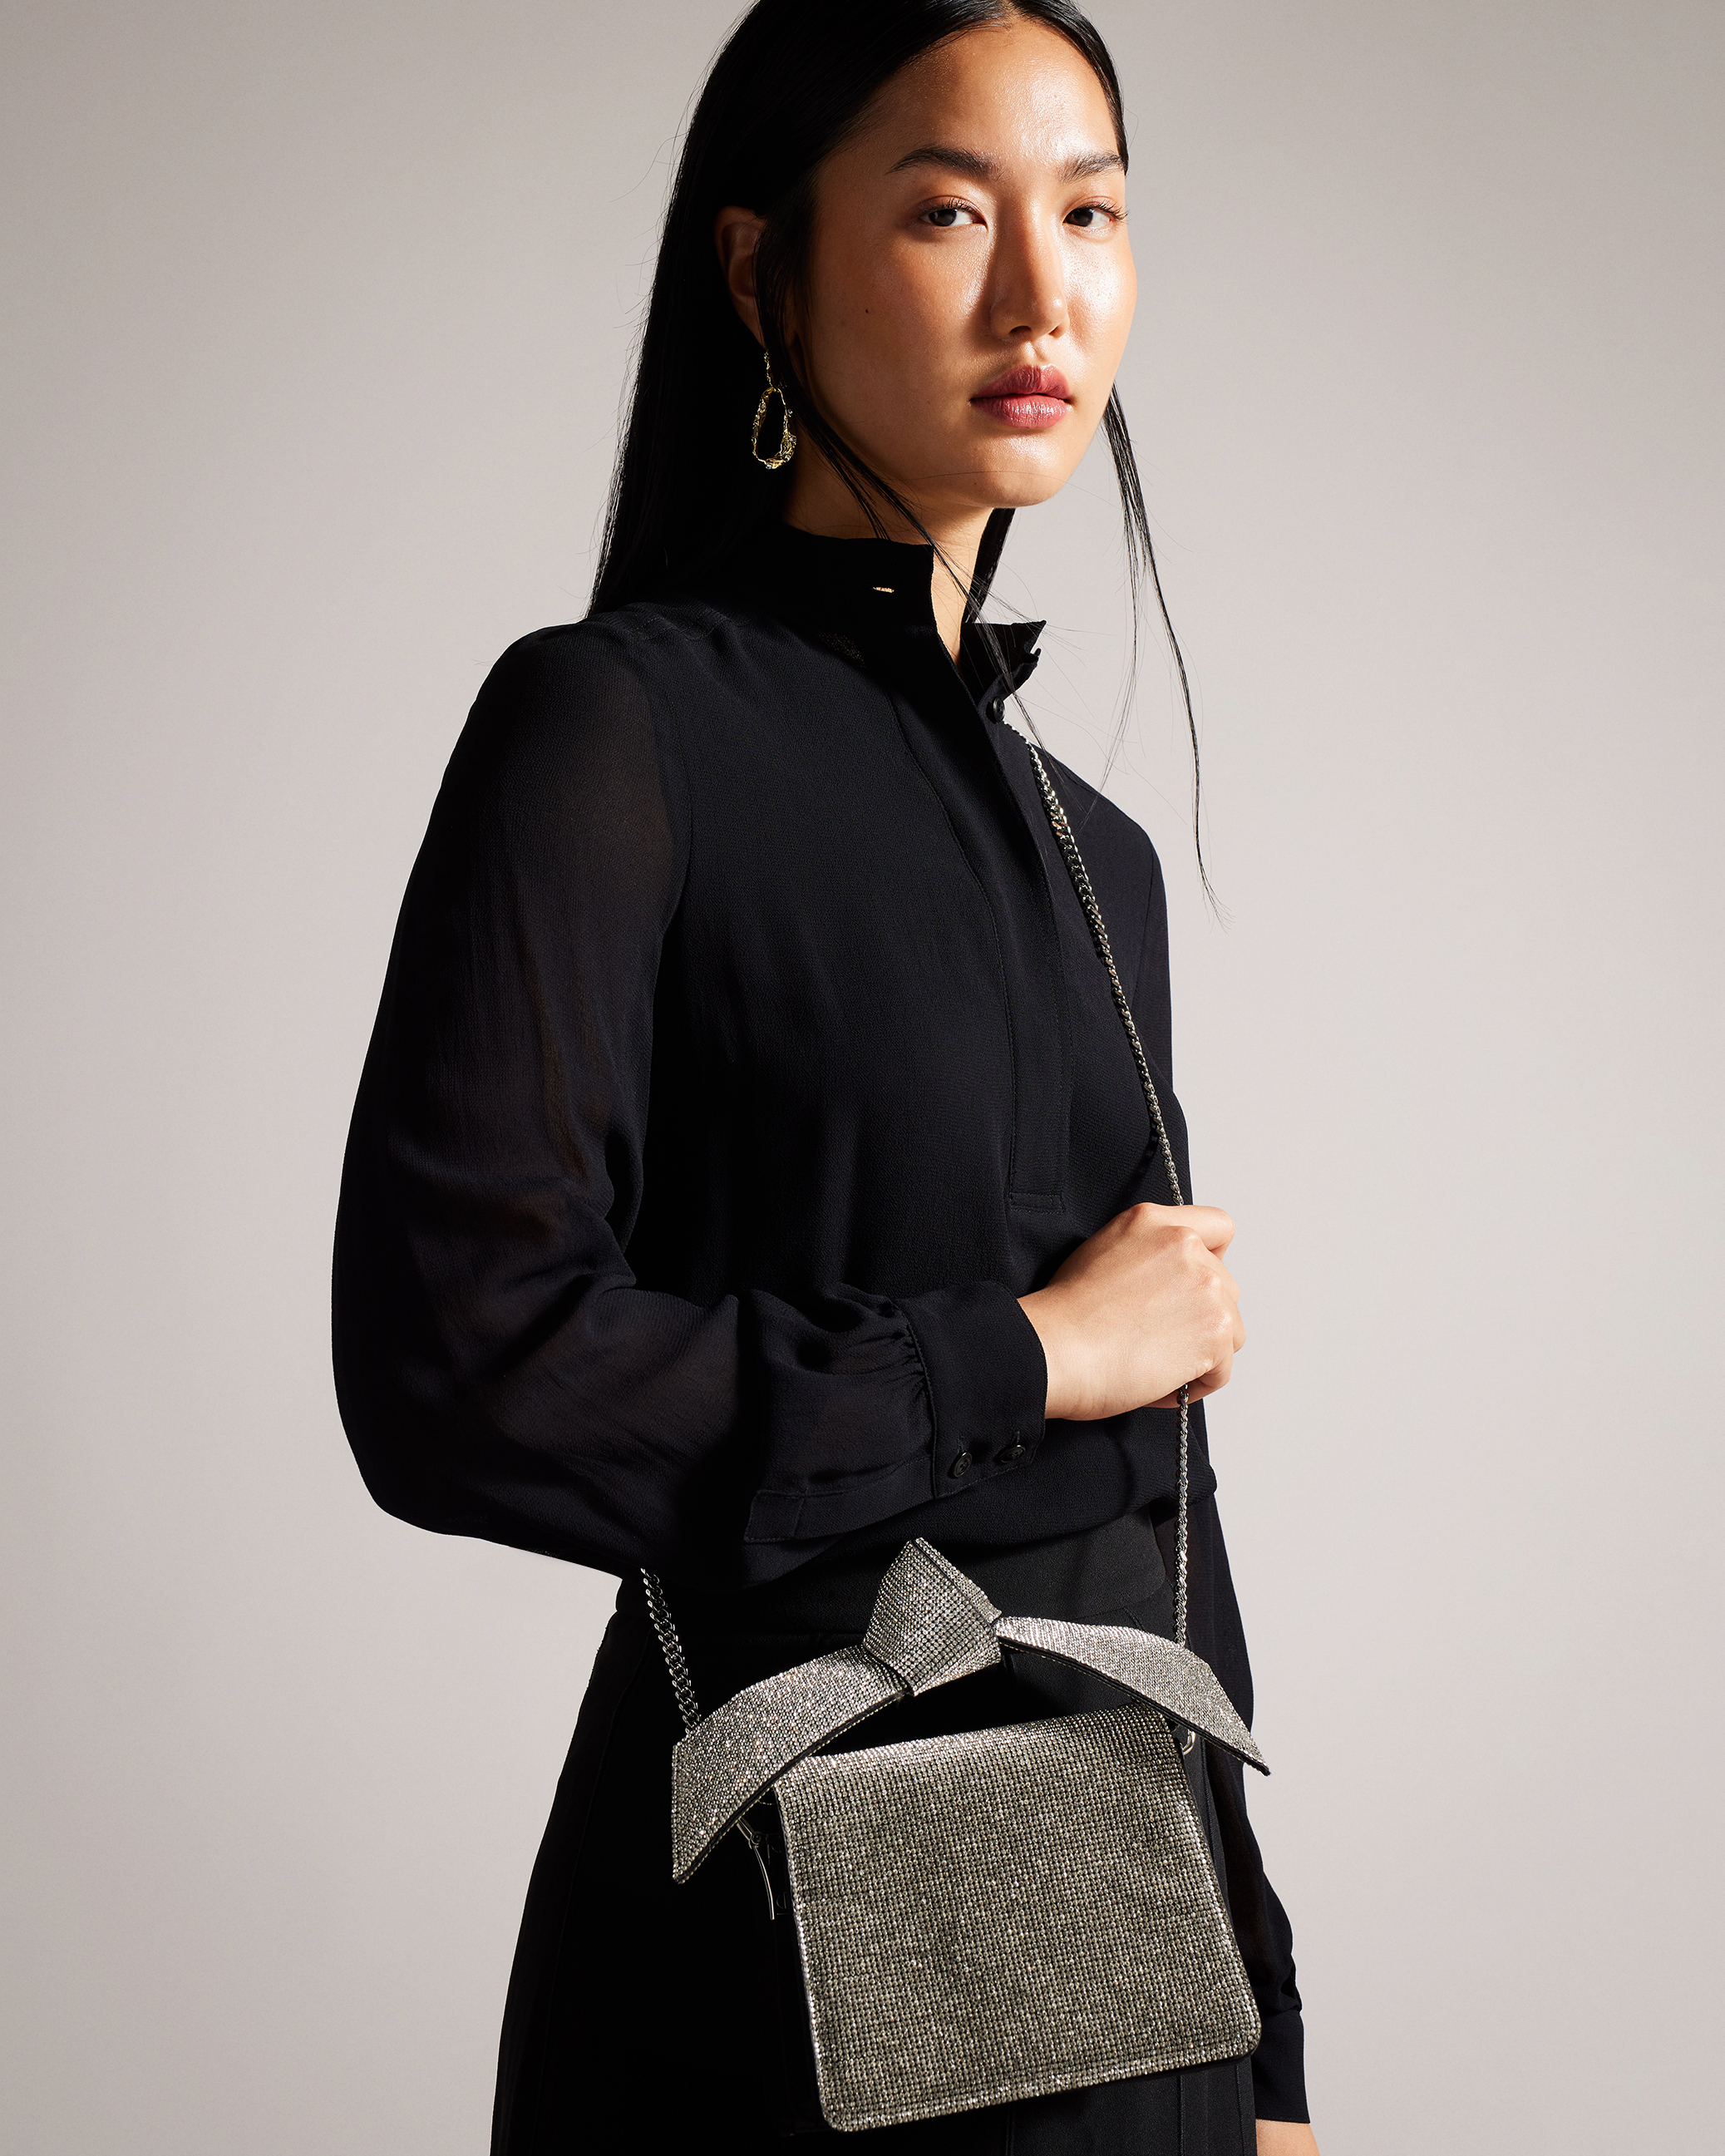 Shop the Latest Ted Baker Bags in the Philippines in November, 2023